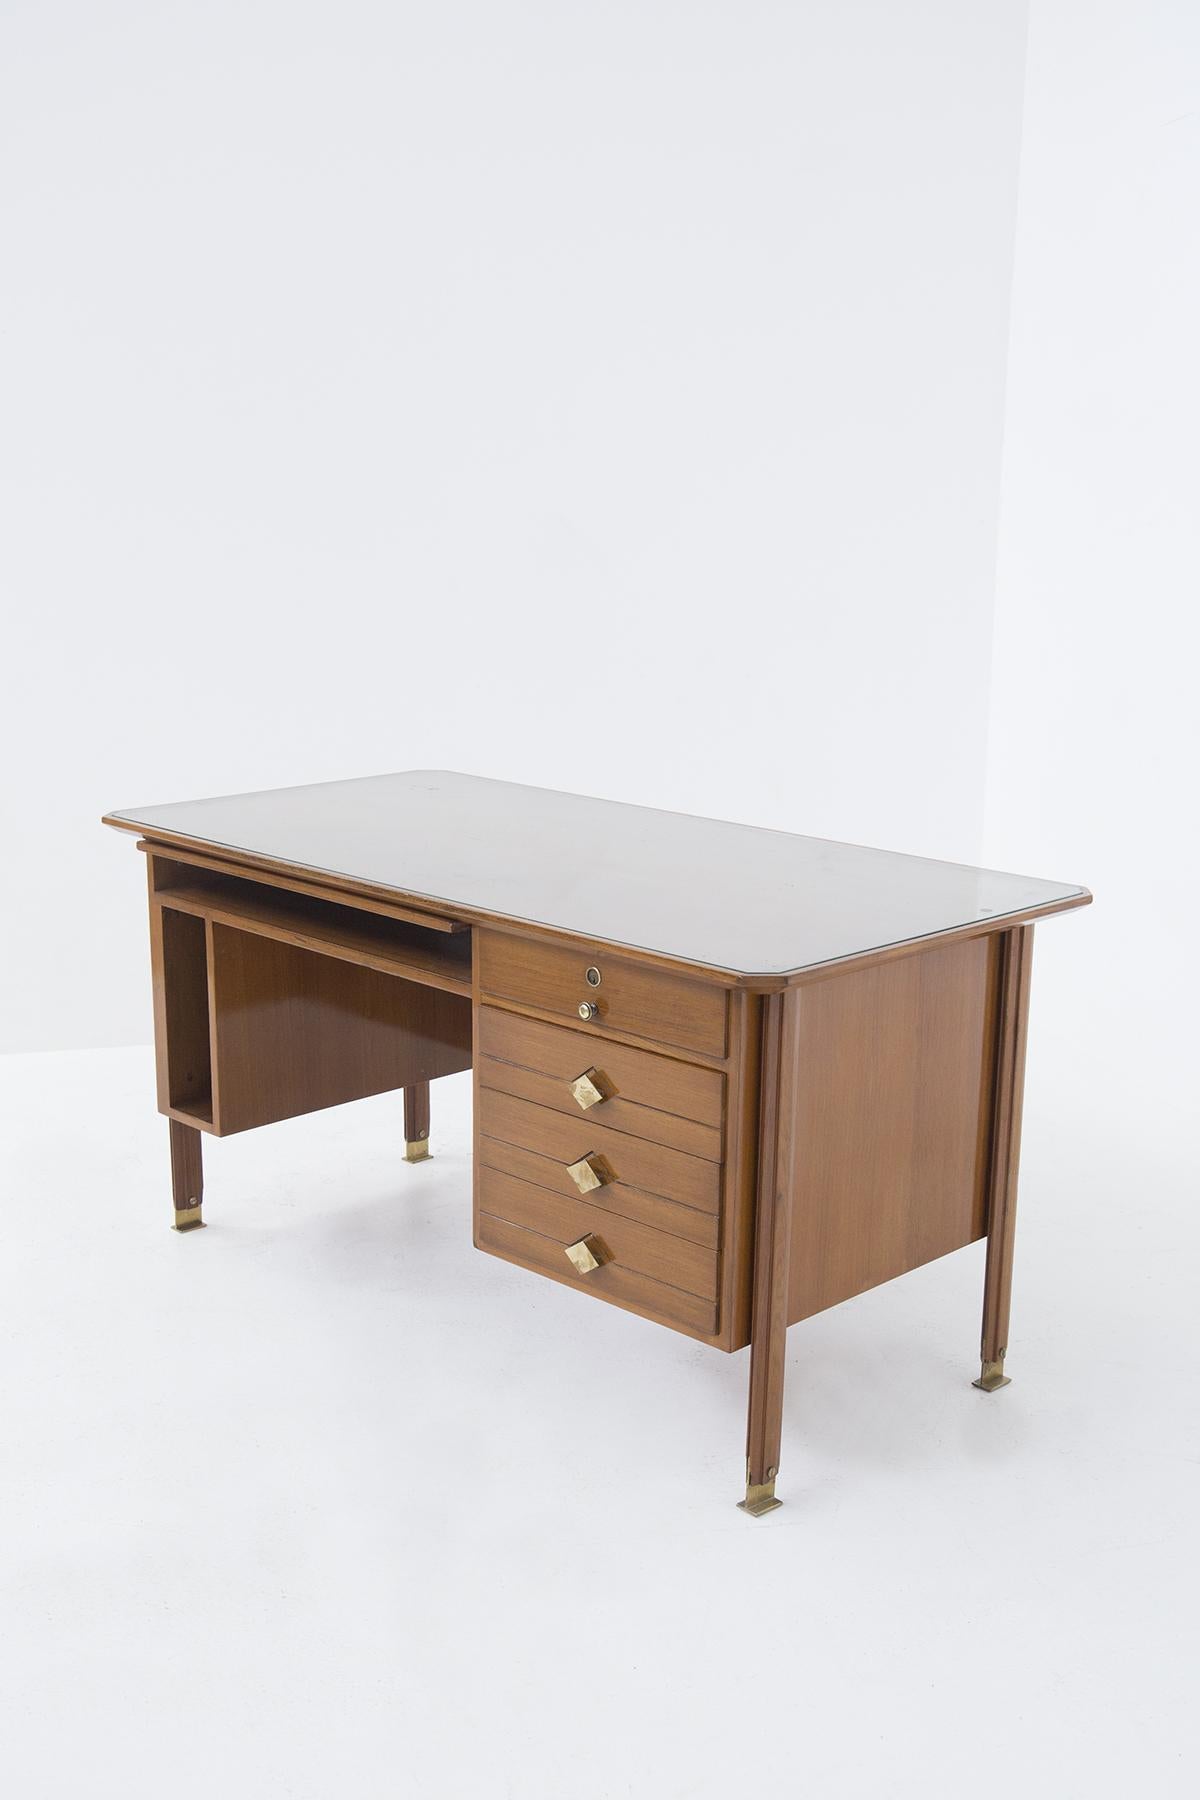 The beautiful desk is made in walnut wood, but the top is covered with glass plate giving the dest and elegant look. The desk features four drawers, one of which can be closed with a key. The drawers have brass knobs, one cylindrical while the